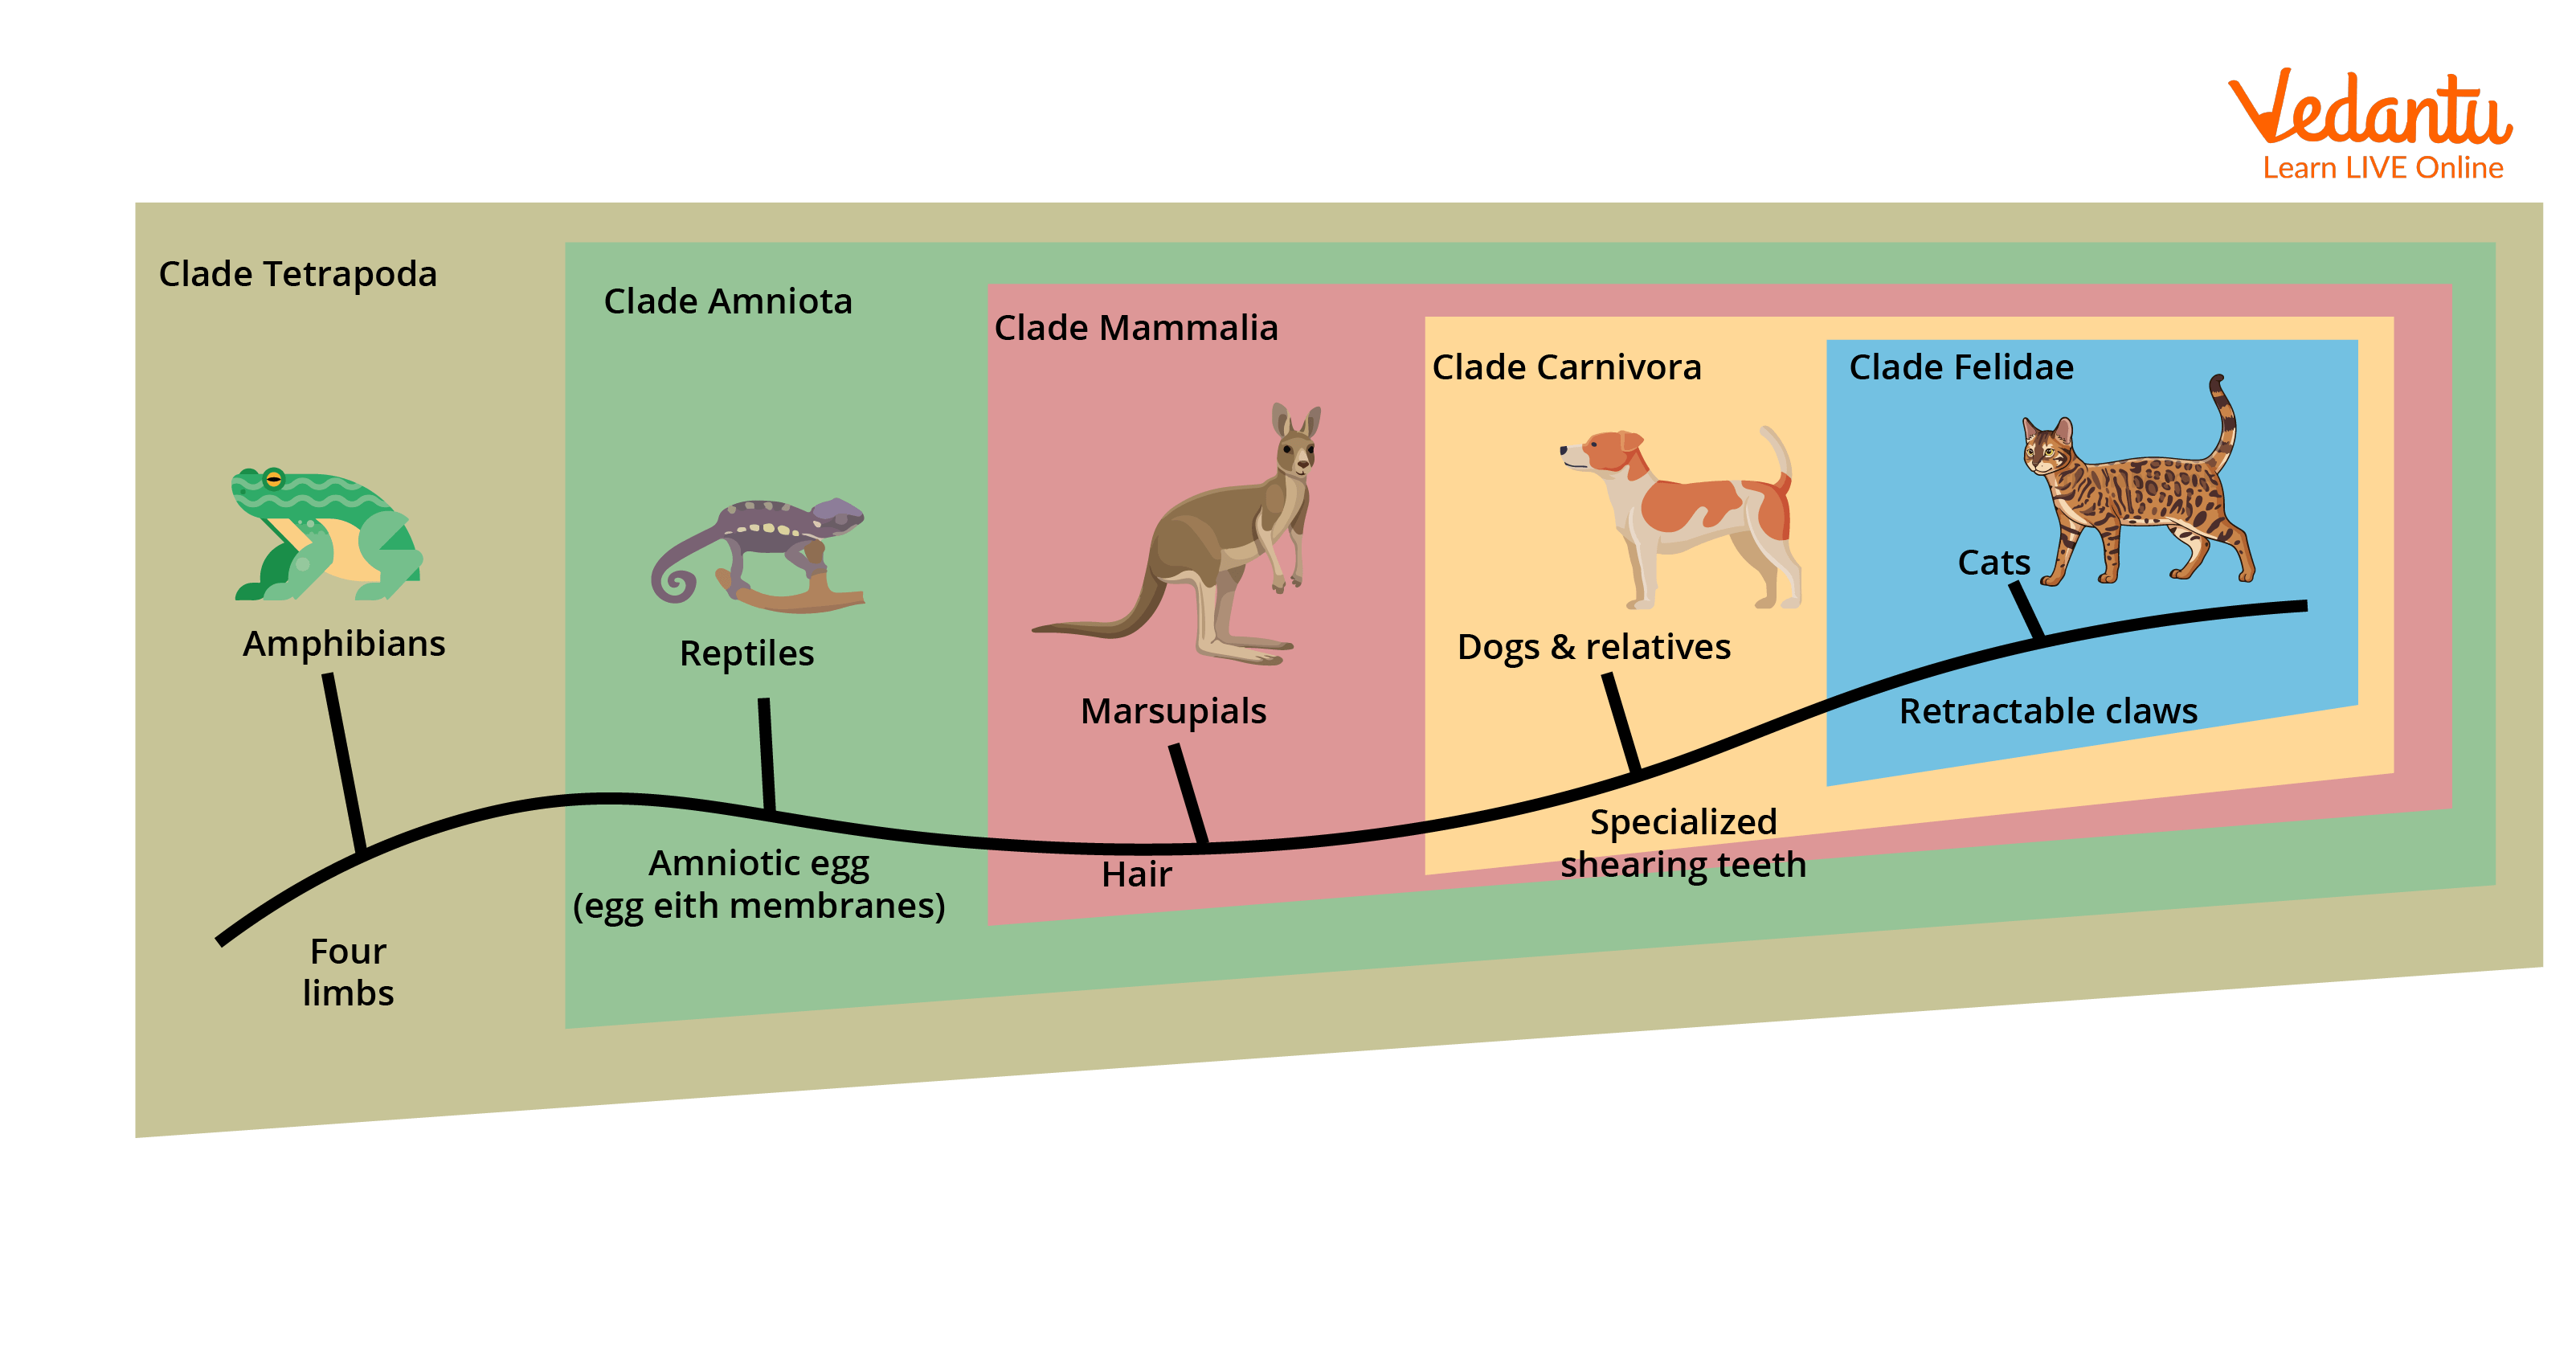 This cladogram shows a simplified phylogeny of the cat family